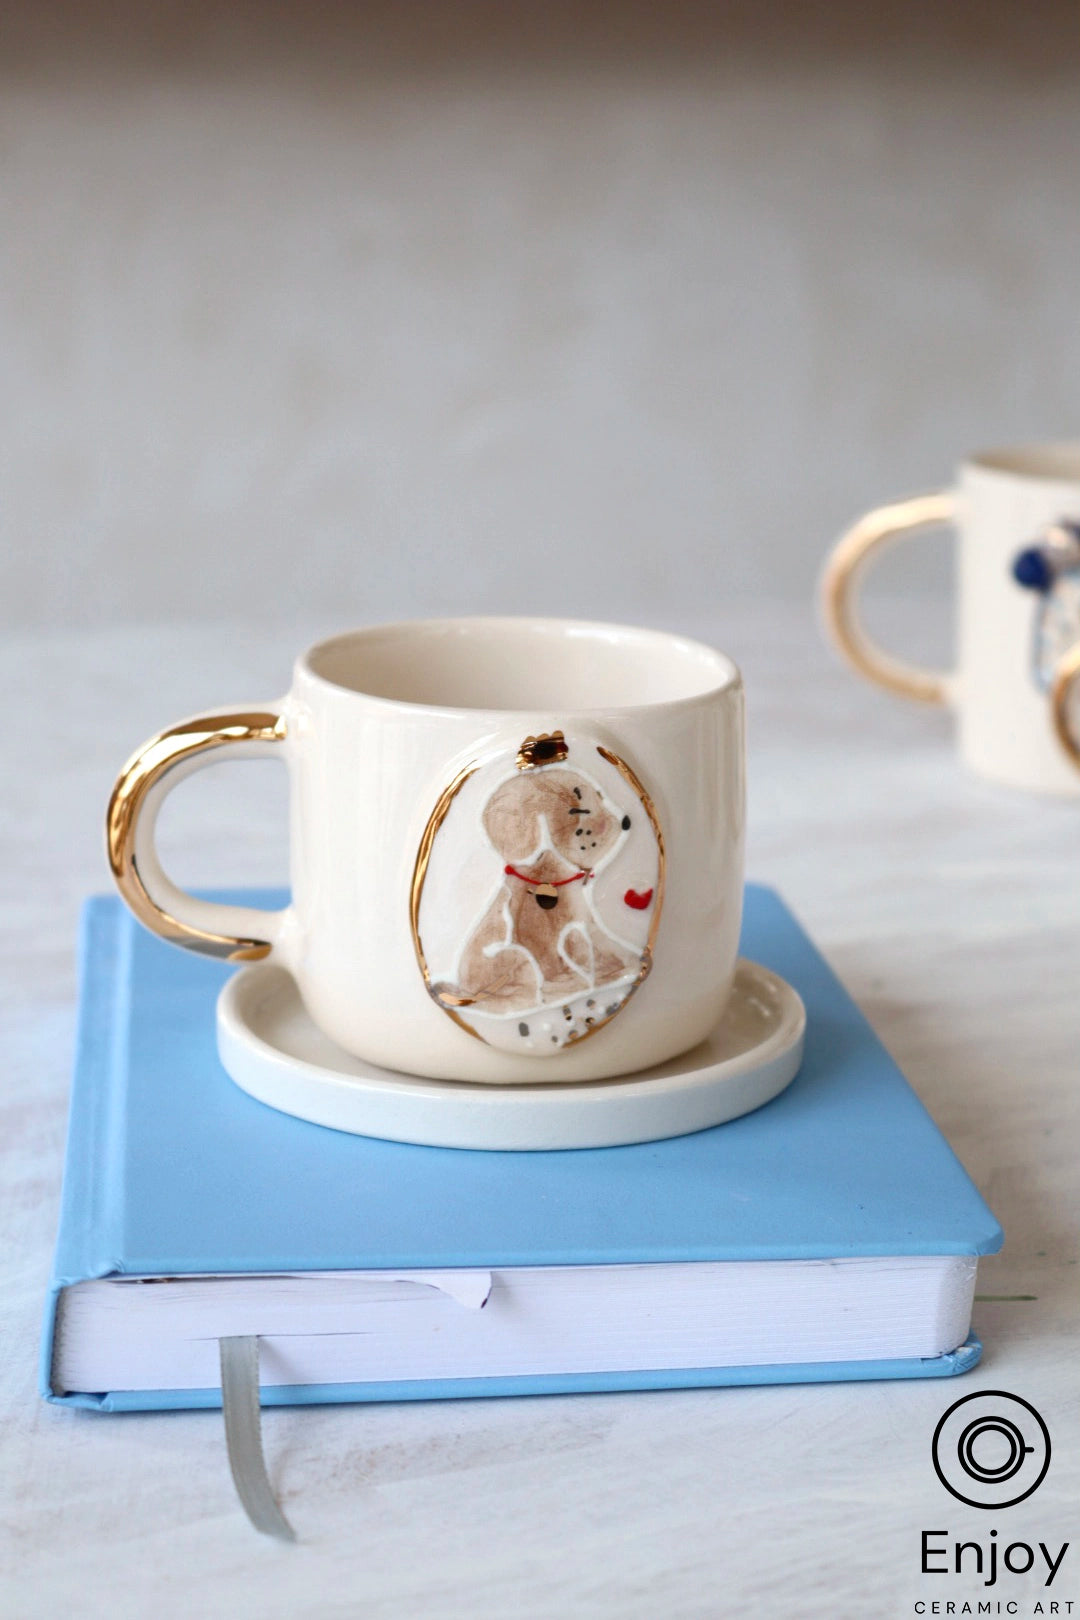 Handcrafted 'Puppy Love' Espresso Cup & Saucer Set - Cute Dog Ceramic Espresso Cup - Perfect Gift for Dog Lovers